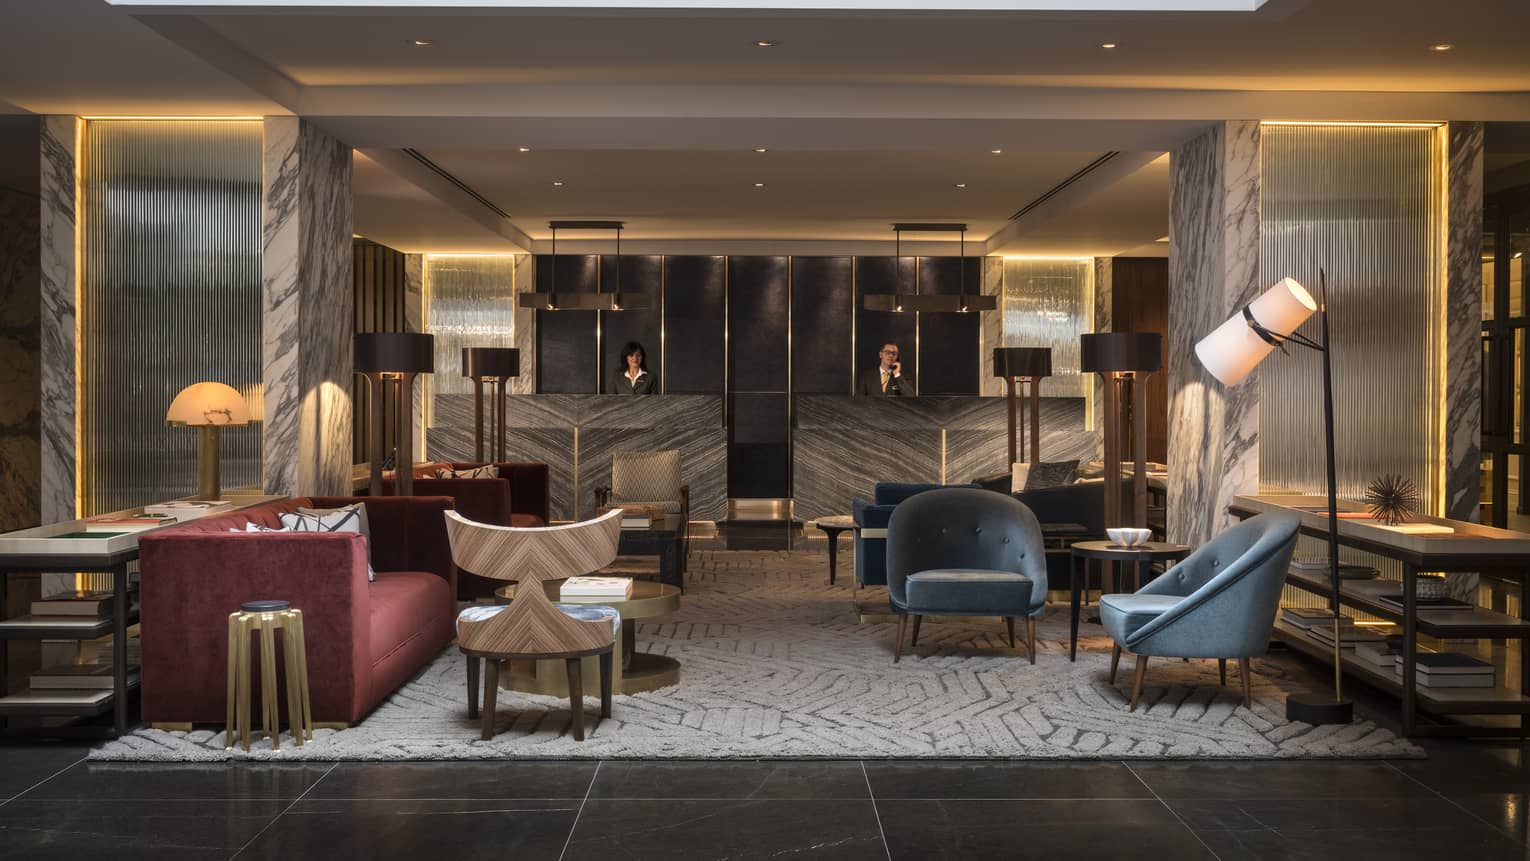 The Lobby of Four Seasons Houston is furnished with two blue velvet arm chairs, a gray and cream abstract rug, a red velvet couch, and an industrial black iron lamp